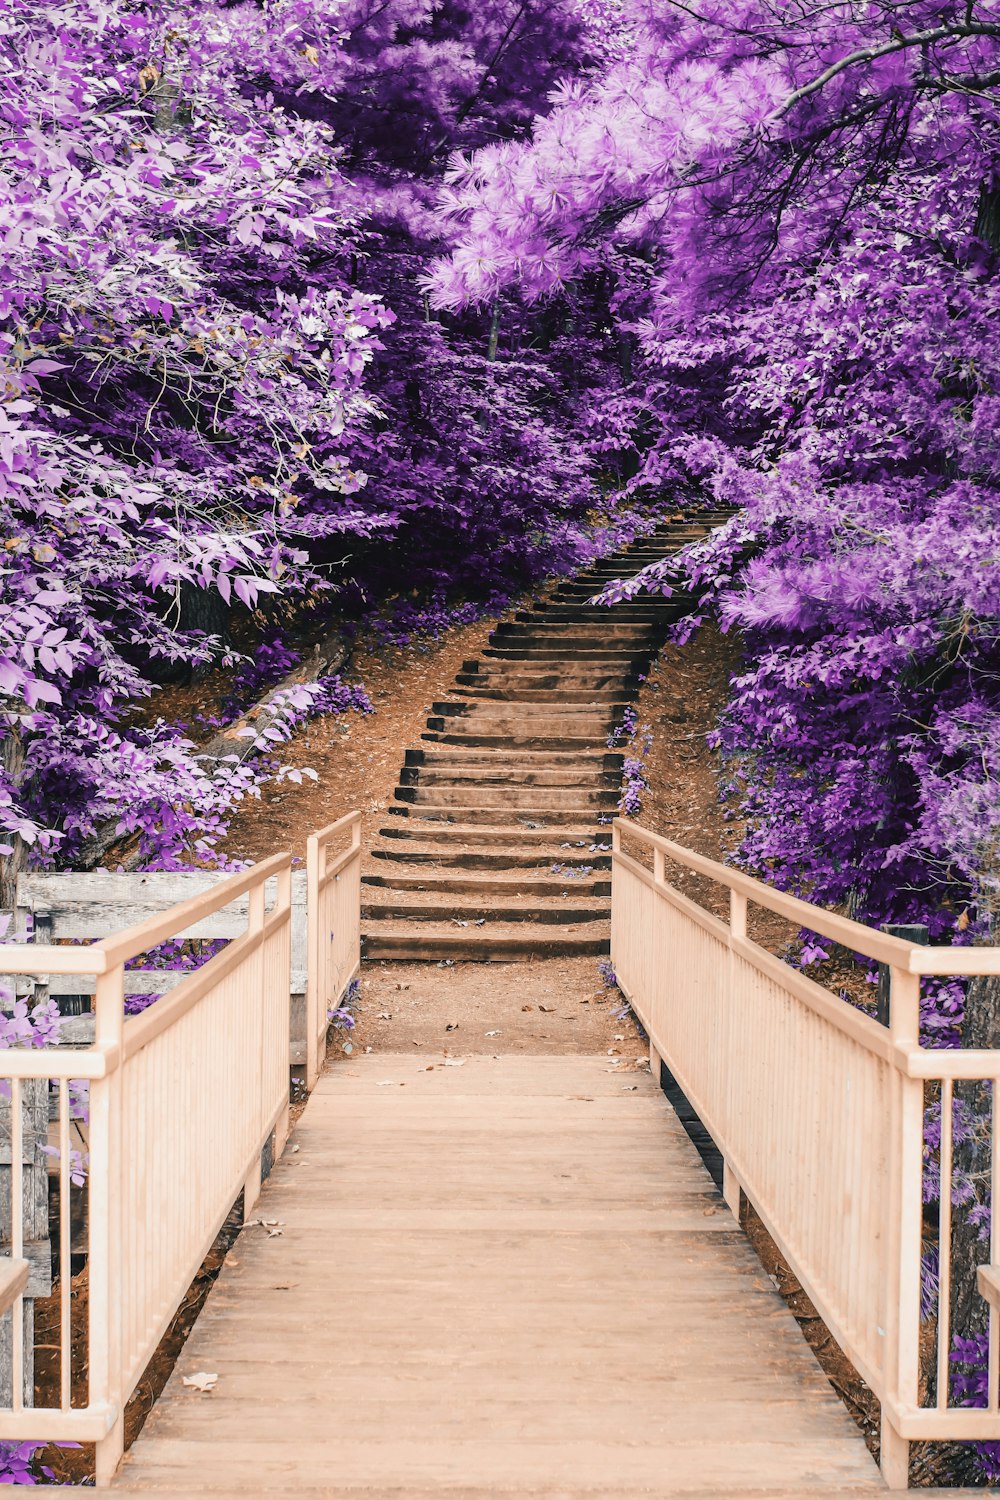 wooden bridge and staircase between purple trees